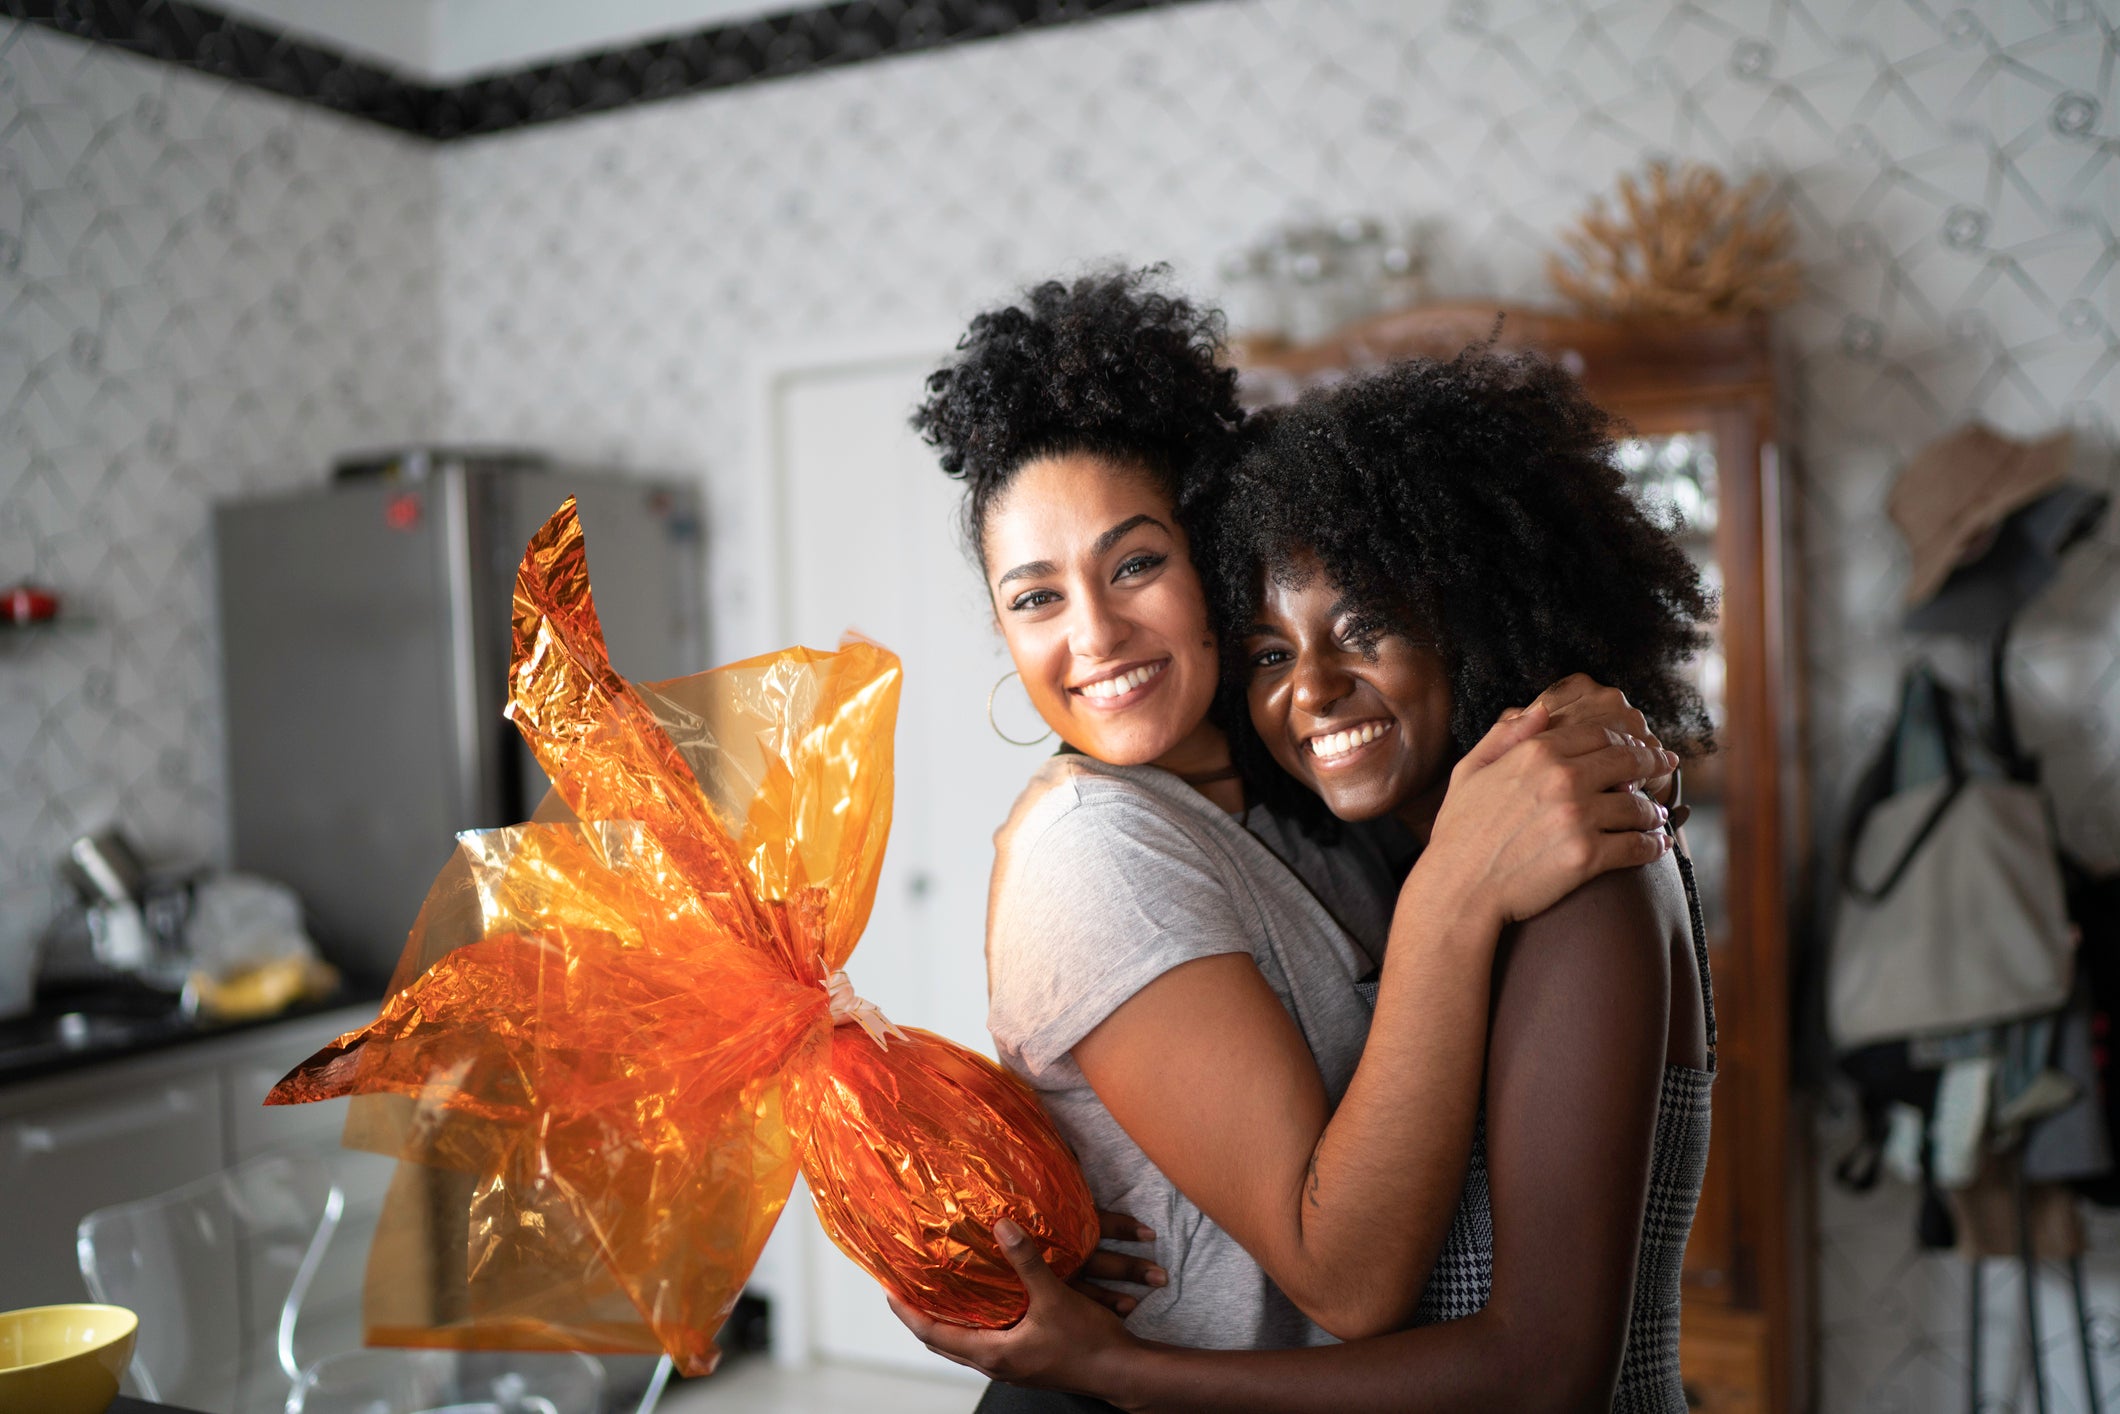 11 Black-Owned Gift Ideas For The Friend Who Has Everything